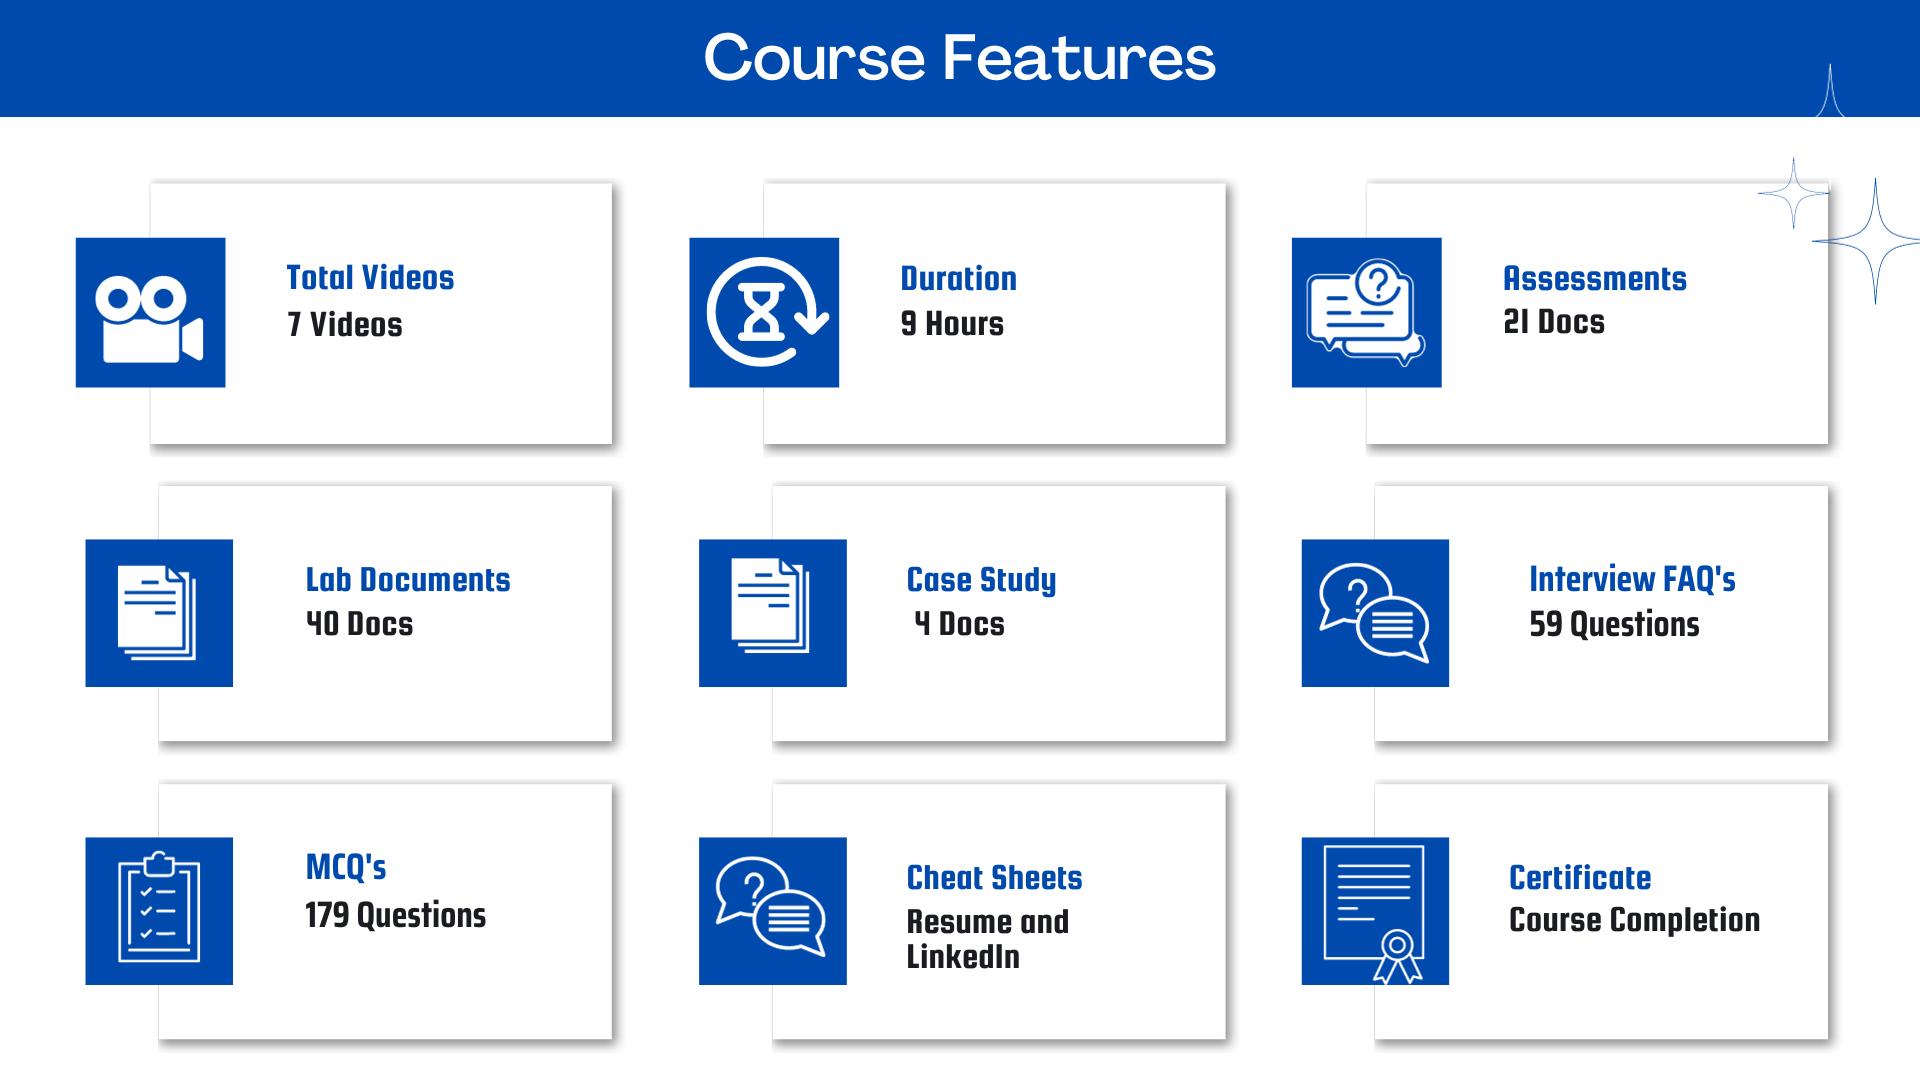 Workday Talent &amp;amp; Performance Course Features